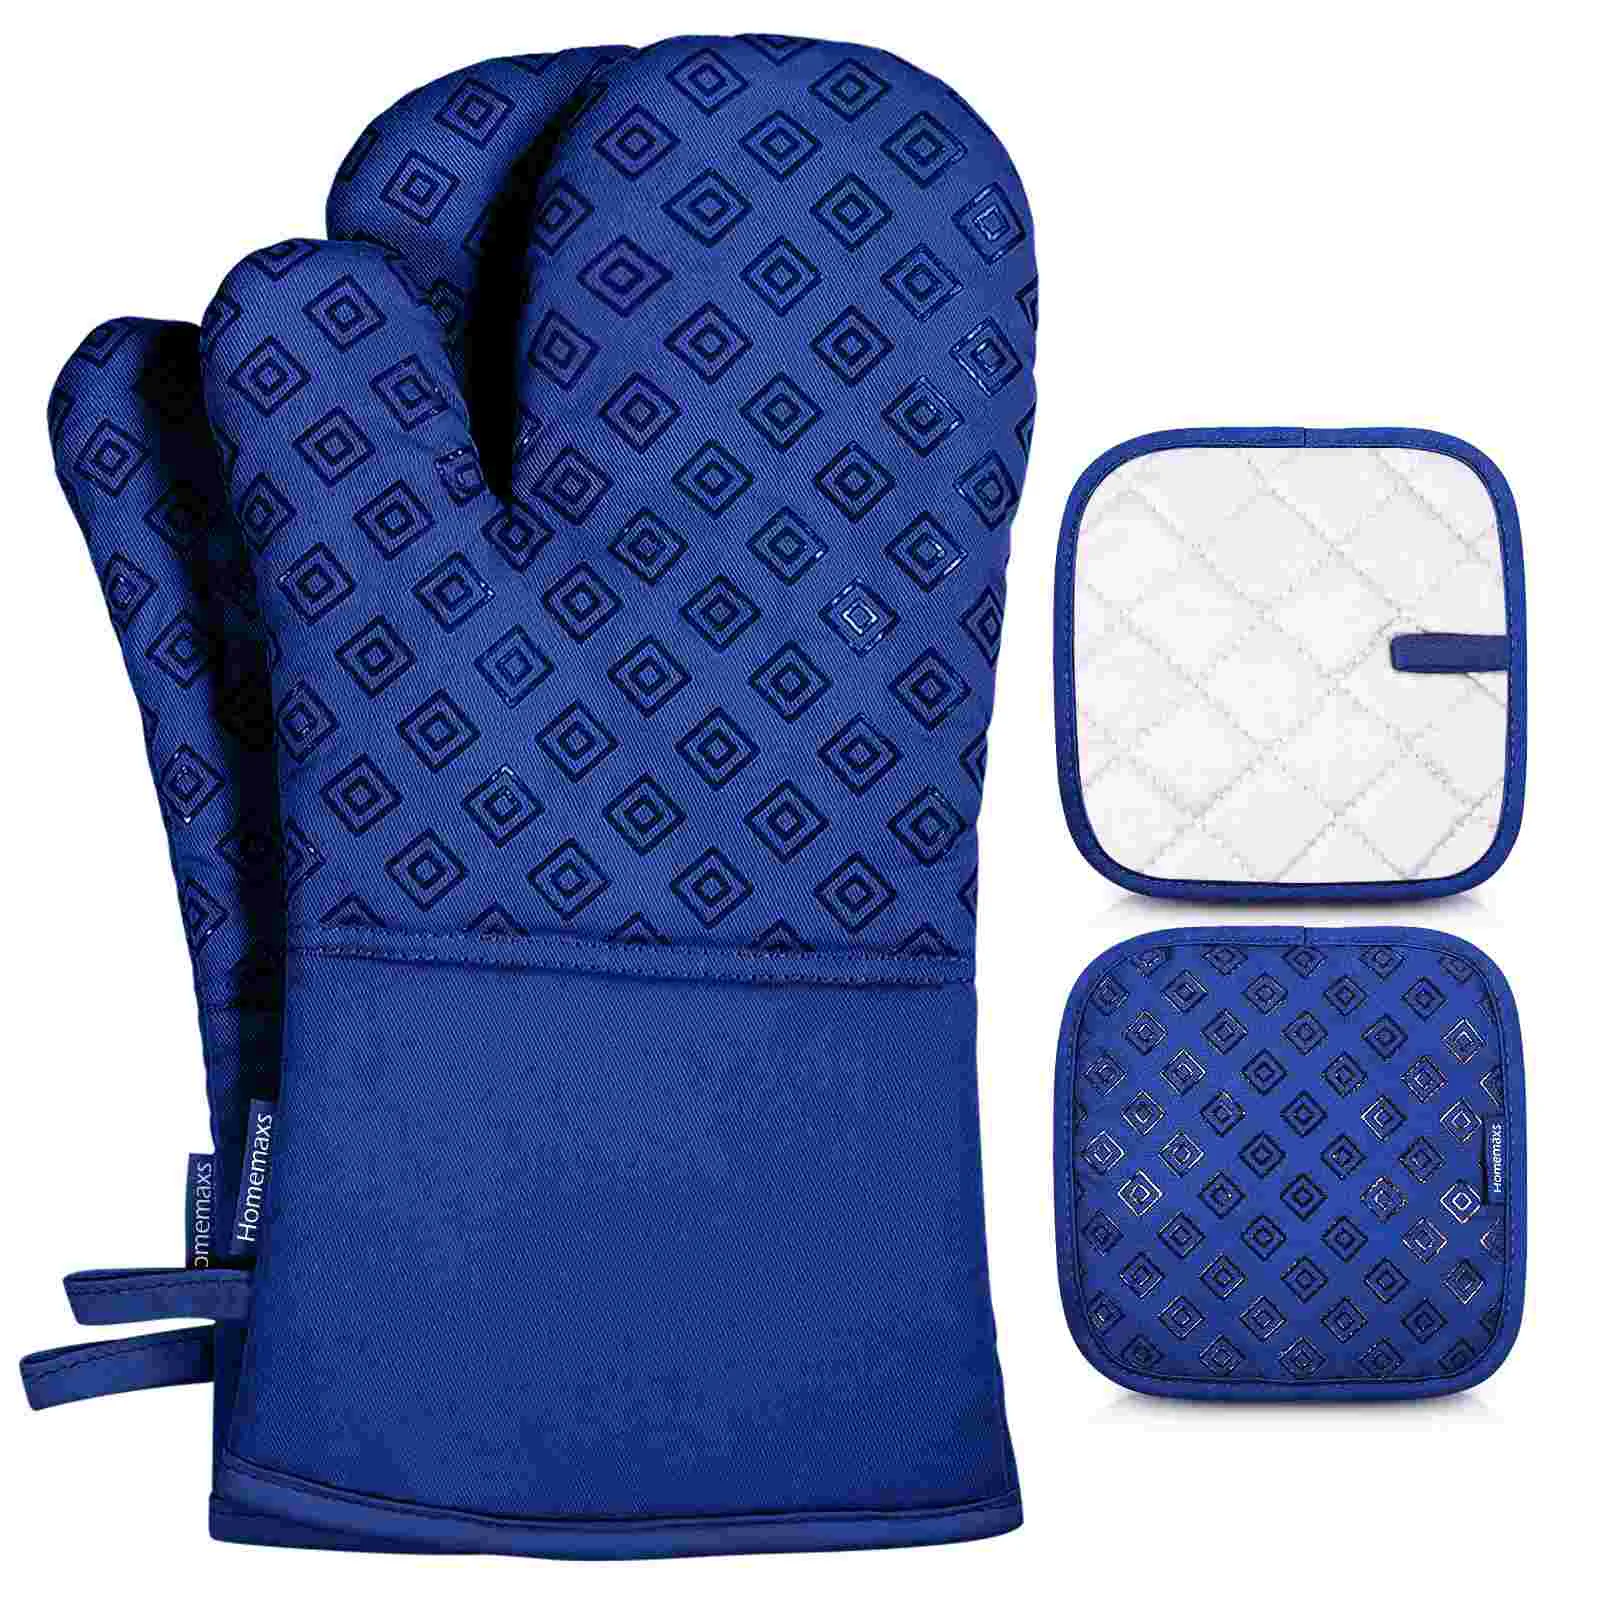 

Homemaxs 2PCS Oven Mitts with 2PCS Heat Resistant Pot Holder Pad Protective Oven Gloves (Blue)